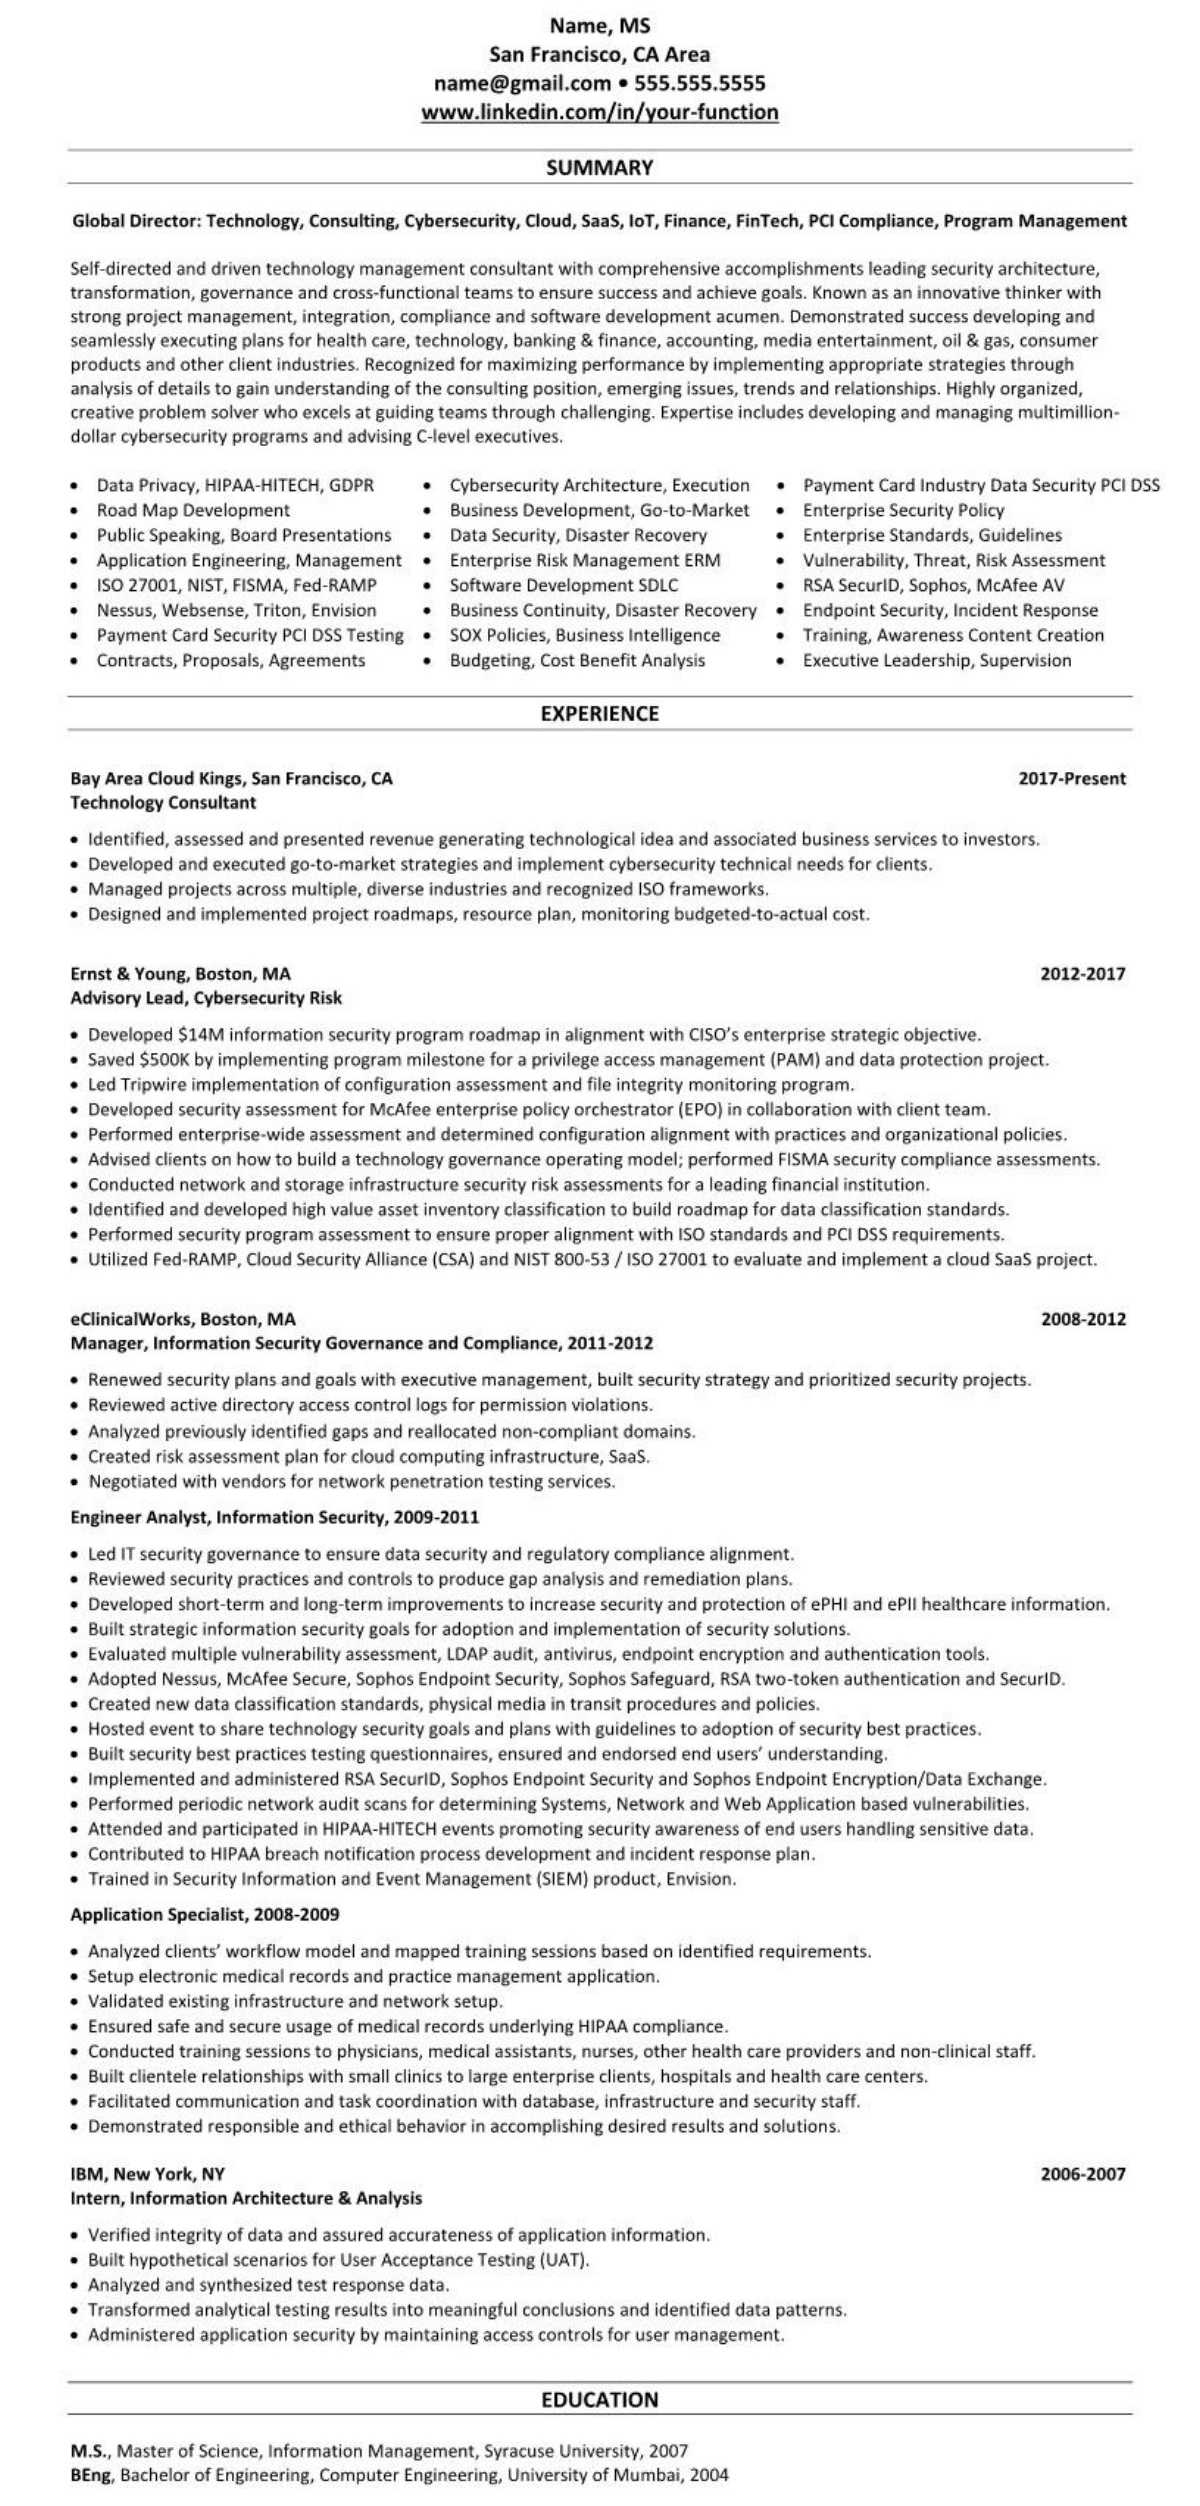 Technical Skills for a Resume (List with 30+ Examples)